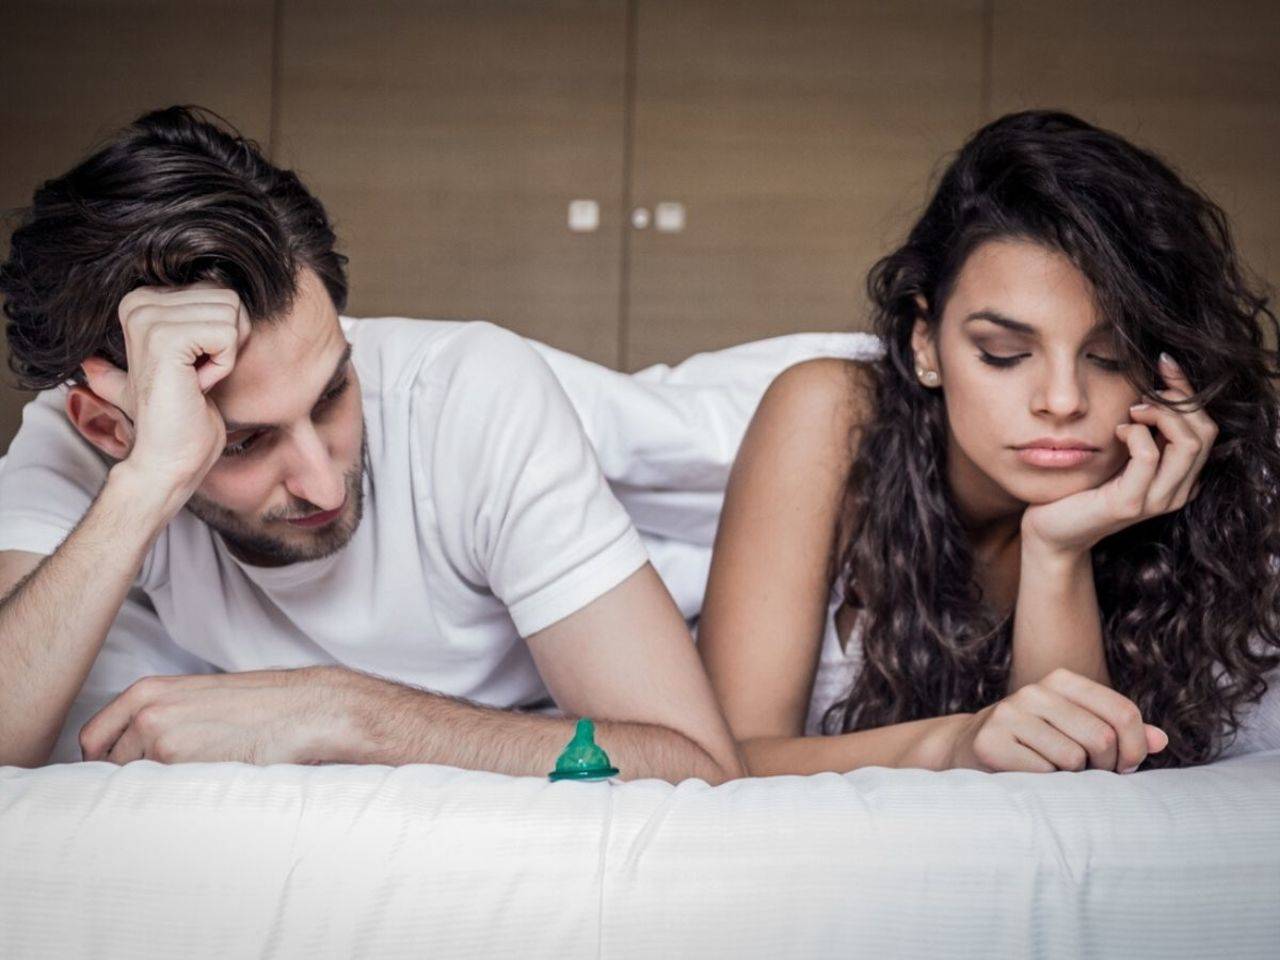 1280px x 960px - First Night Sex / Wedding Night Sex: 6 Reasons Why it isn't Always Good |  Is It Good to Have Sex on the First Night? | - Times of India